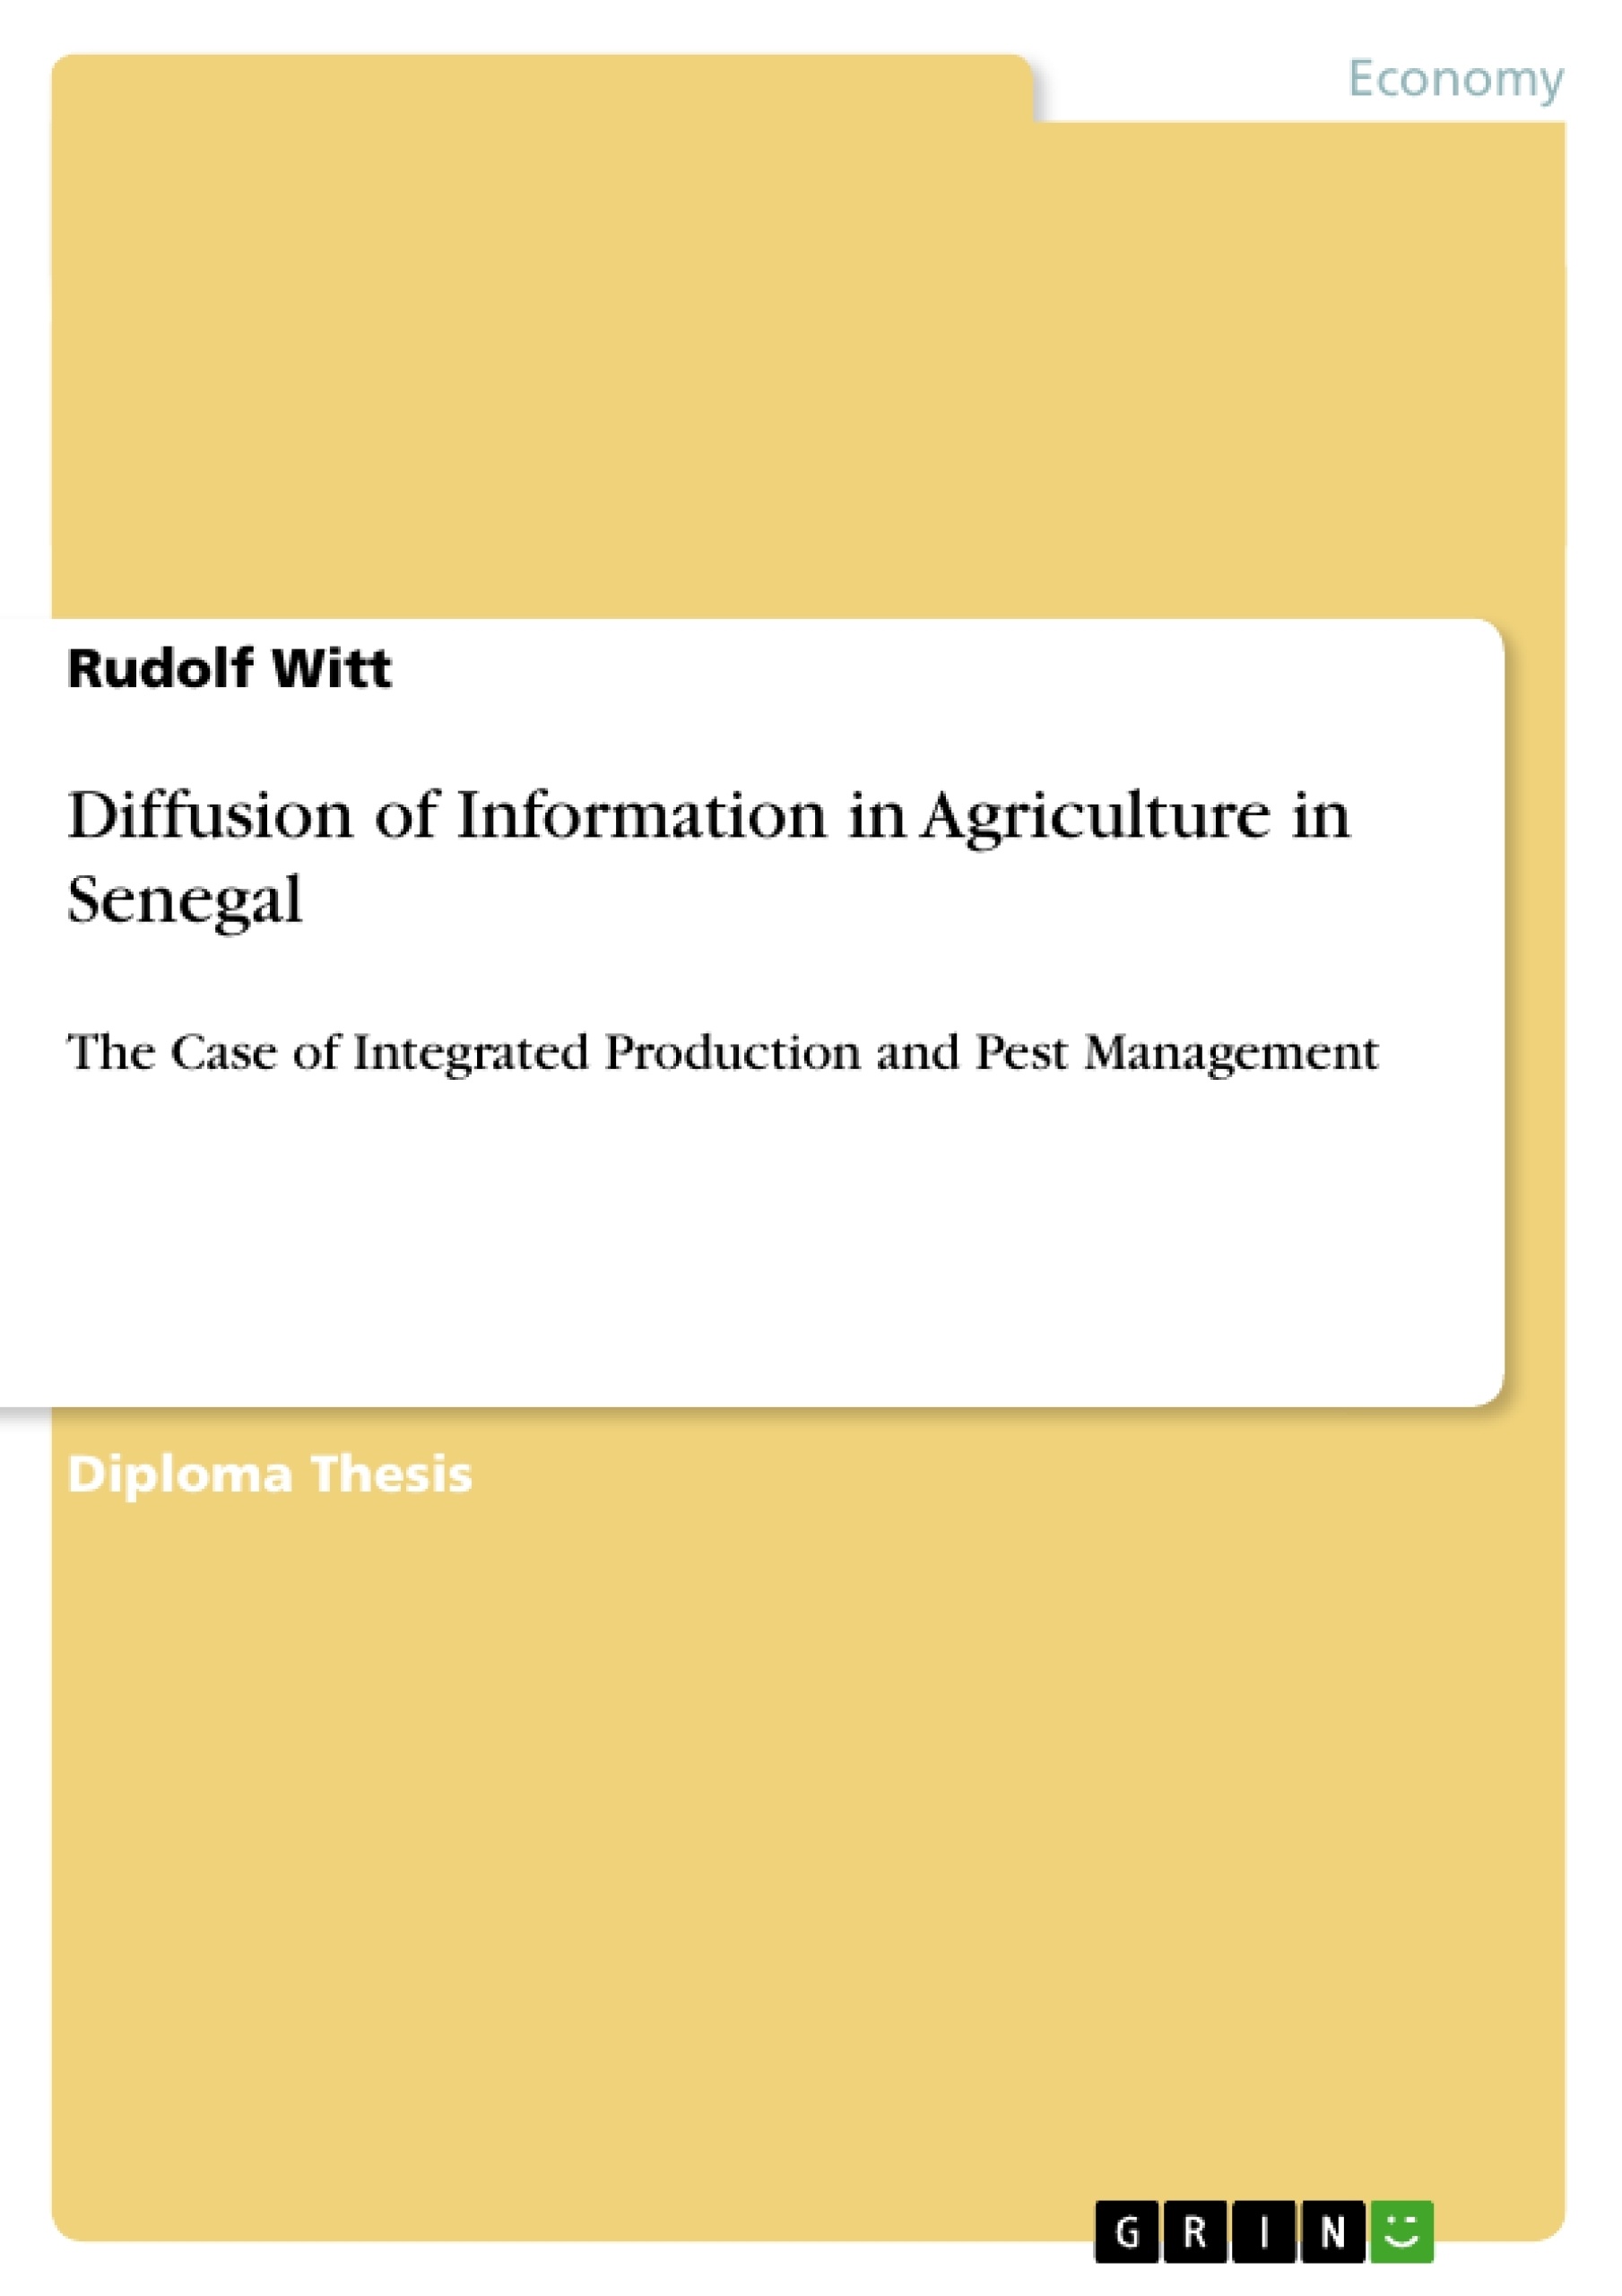 Title: Diffusion of Information in Agriculture in Senegal